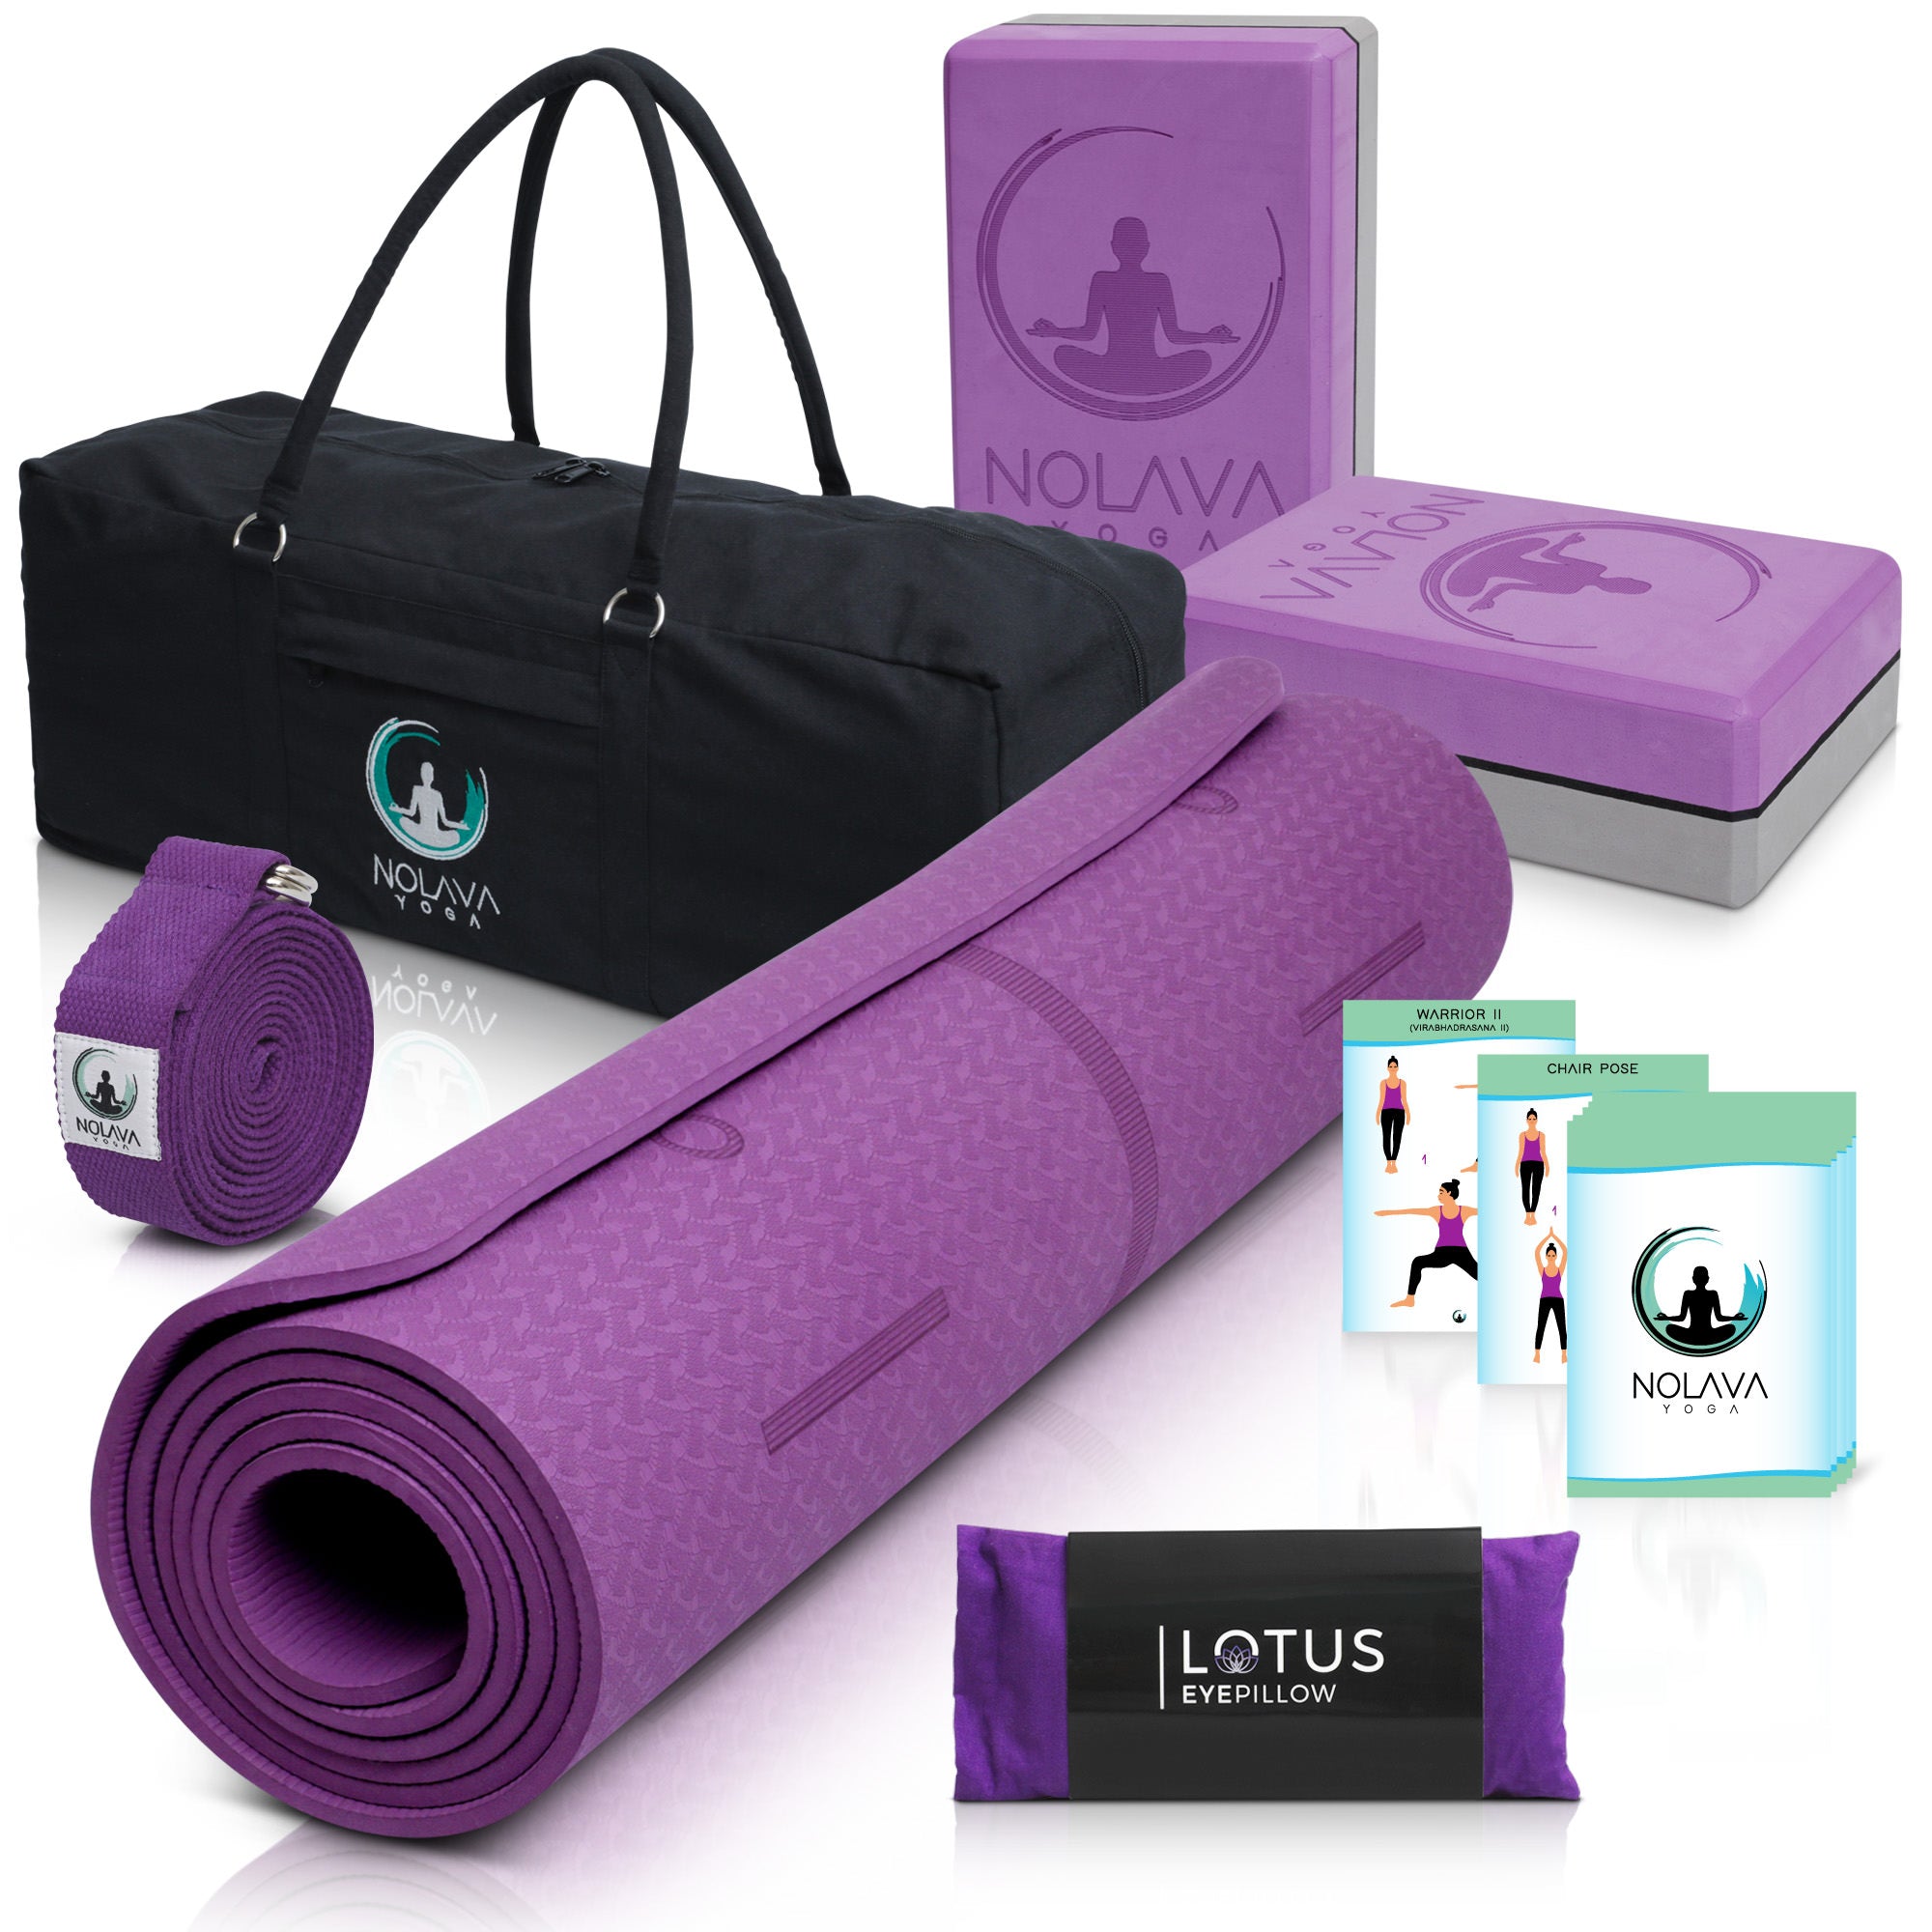 10 Pcs Yoga Starter Kit Include Yoga Mat with Carry Strap, 2 Yoga